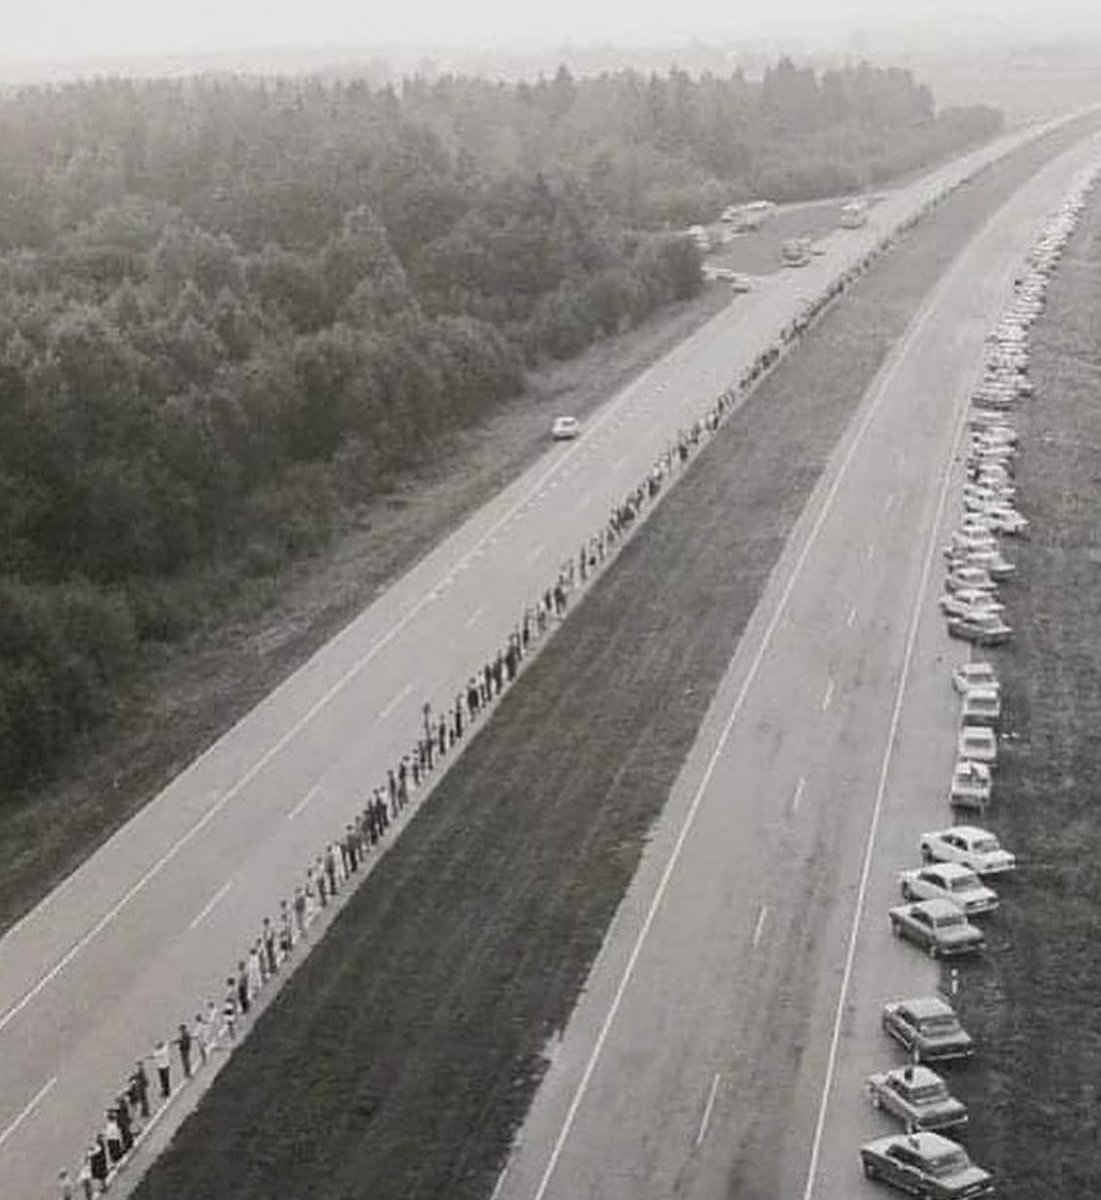 This is the Baltic Way. On 23 August 1989, two million people joined their hands to form a human chain spanning 675.5 km across the three Baltic States of Lithuania, Estonia and Latvia. The protest was against Soviet oppression, and to support the independence movements of the…